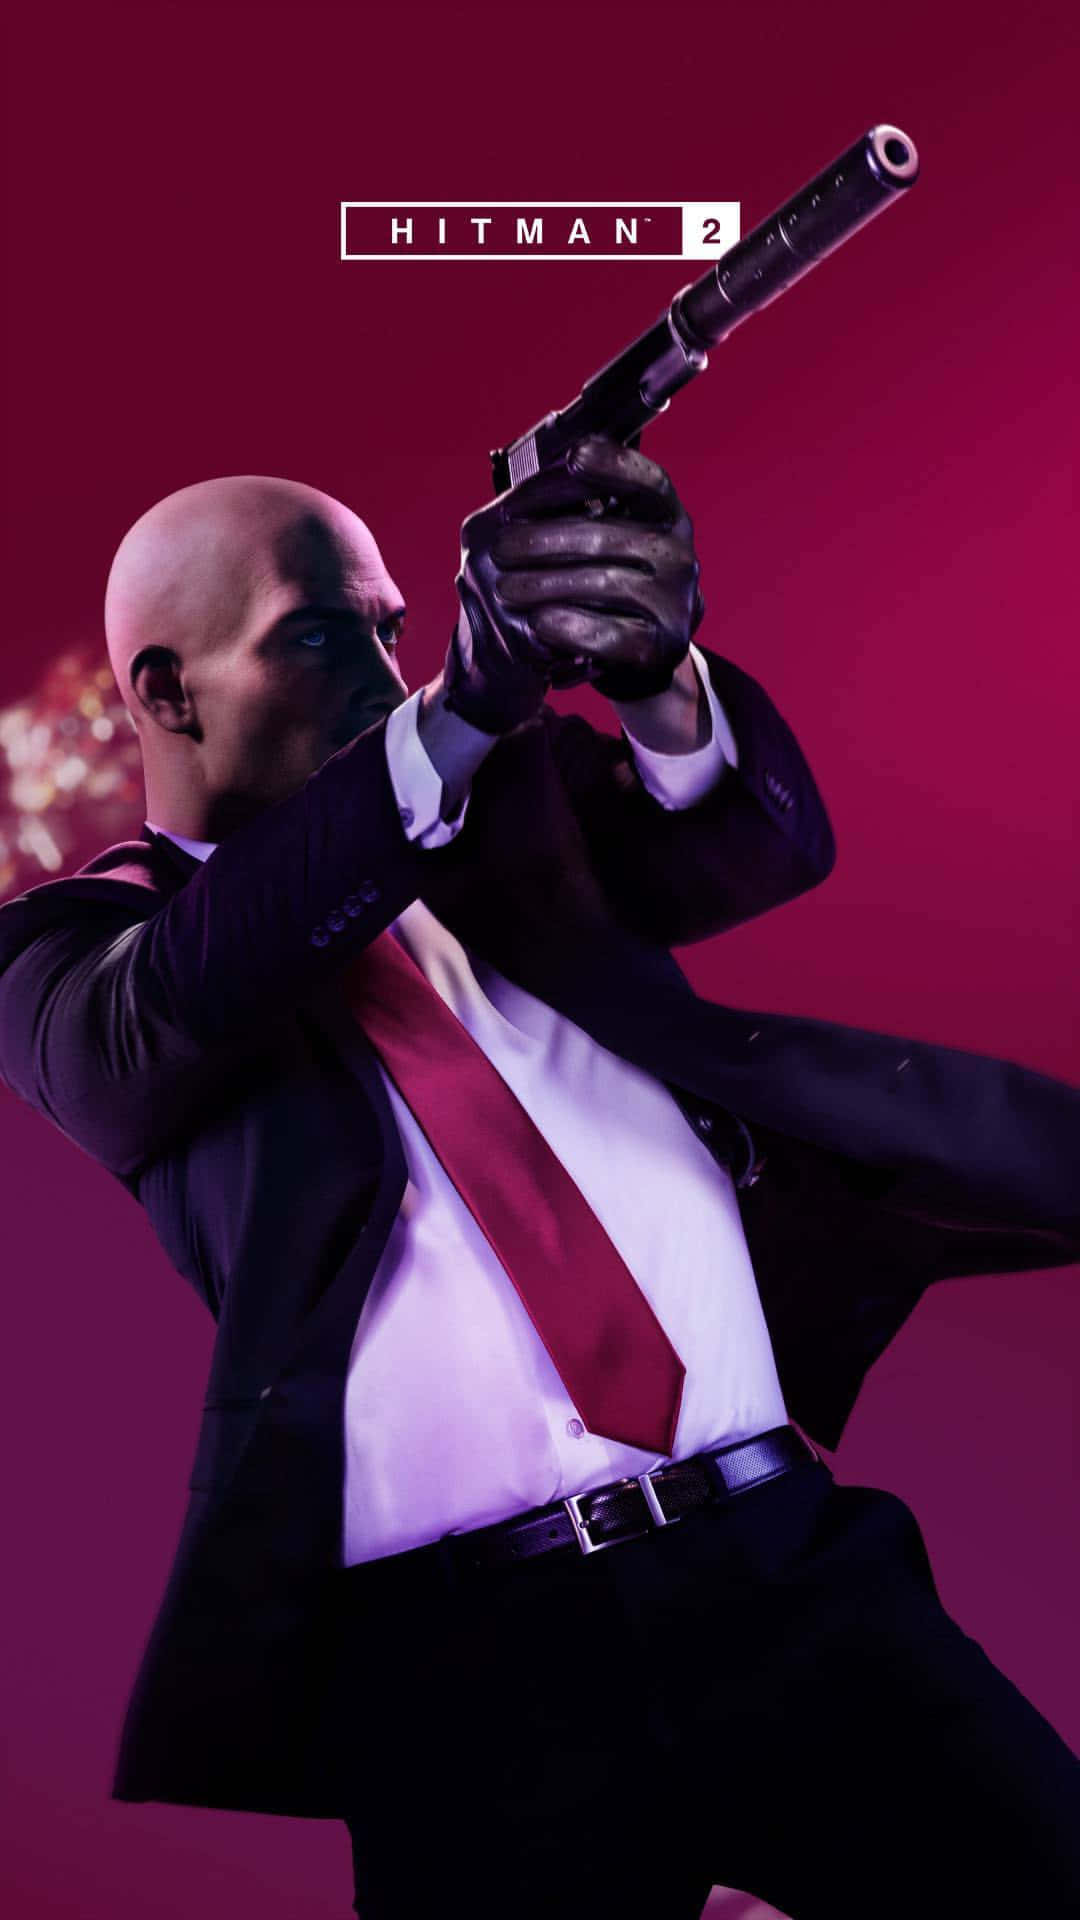 Take on Contracts with Hitman 2 on the Revolutionary iPhone X